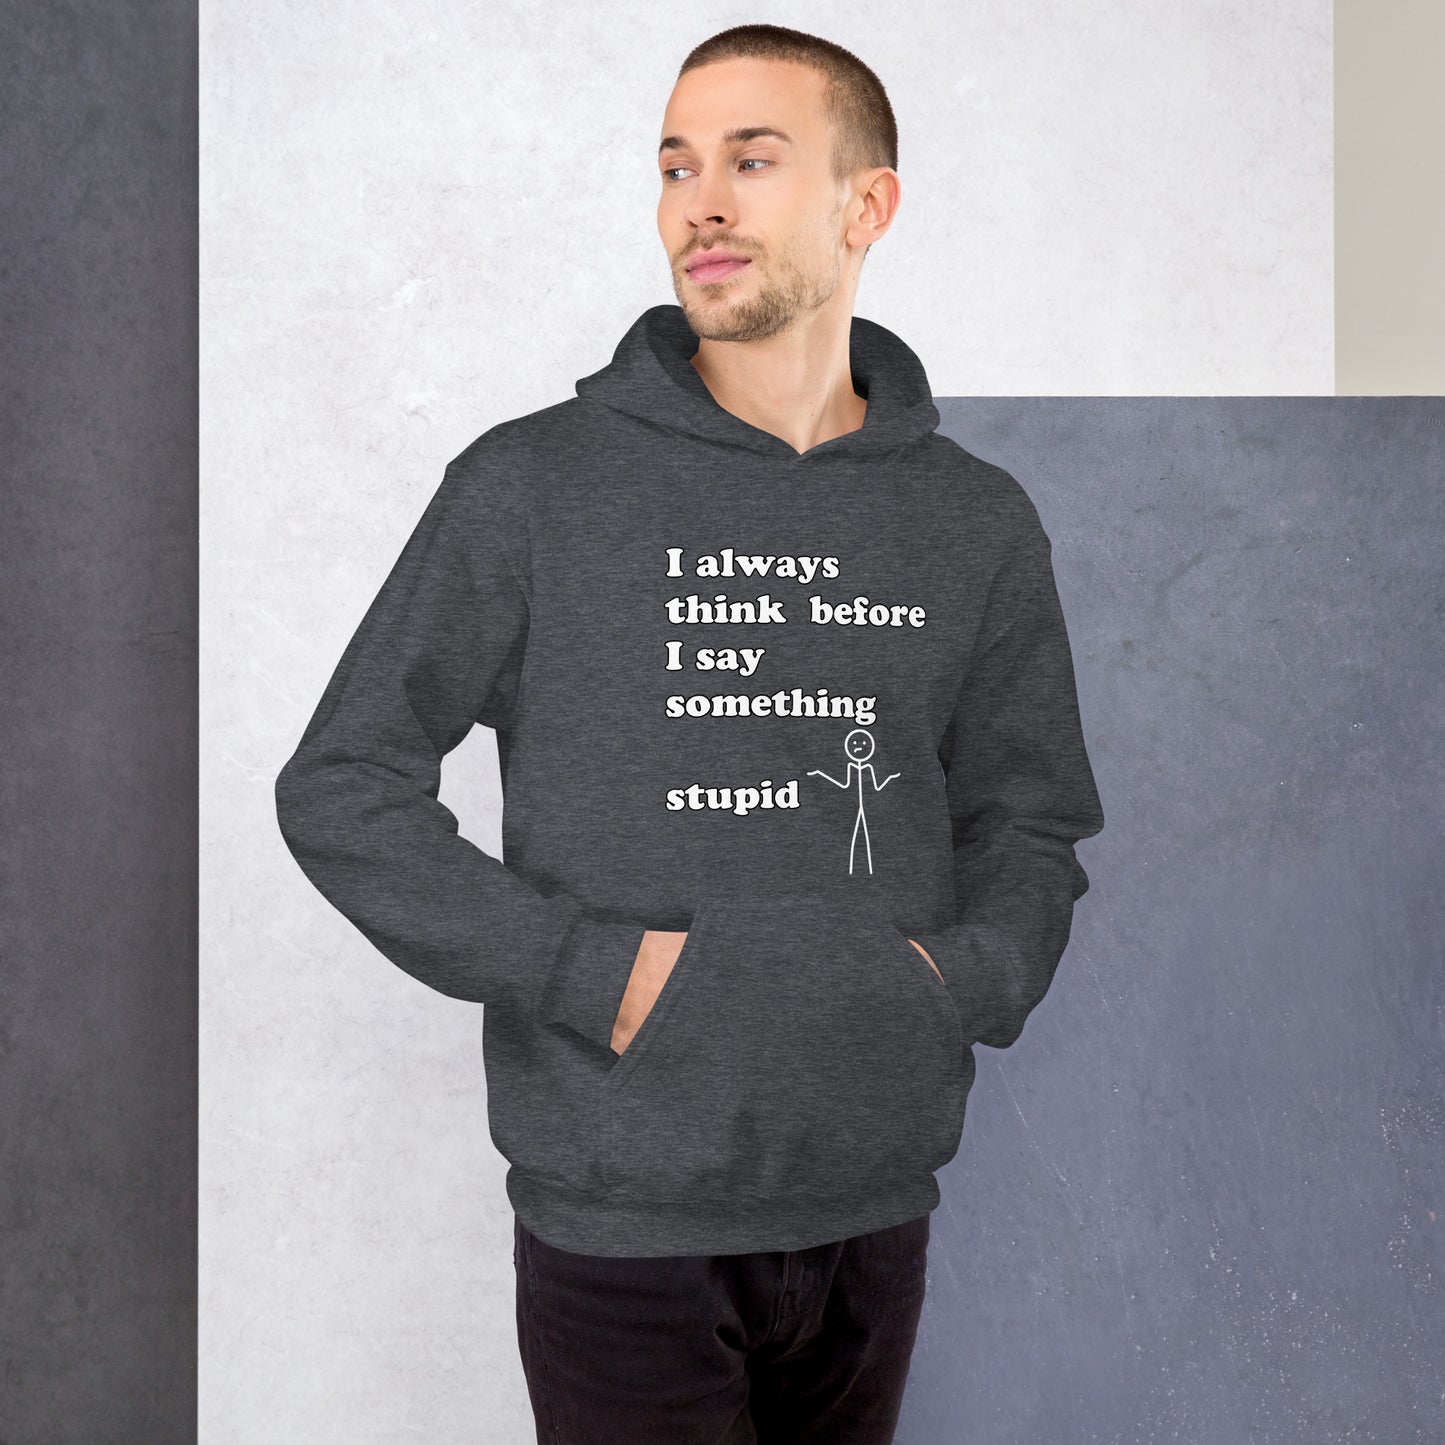 Man with grey hoodie with text "I always think before I say something stupid"